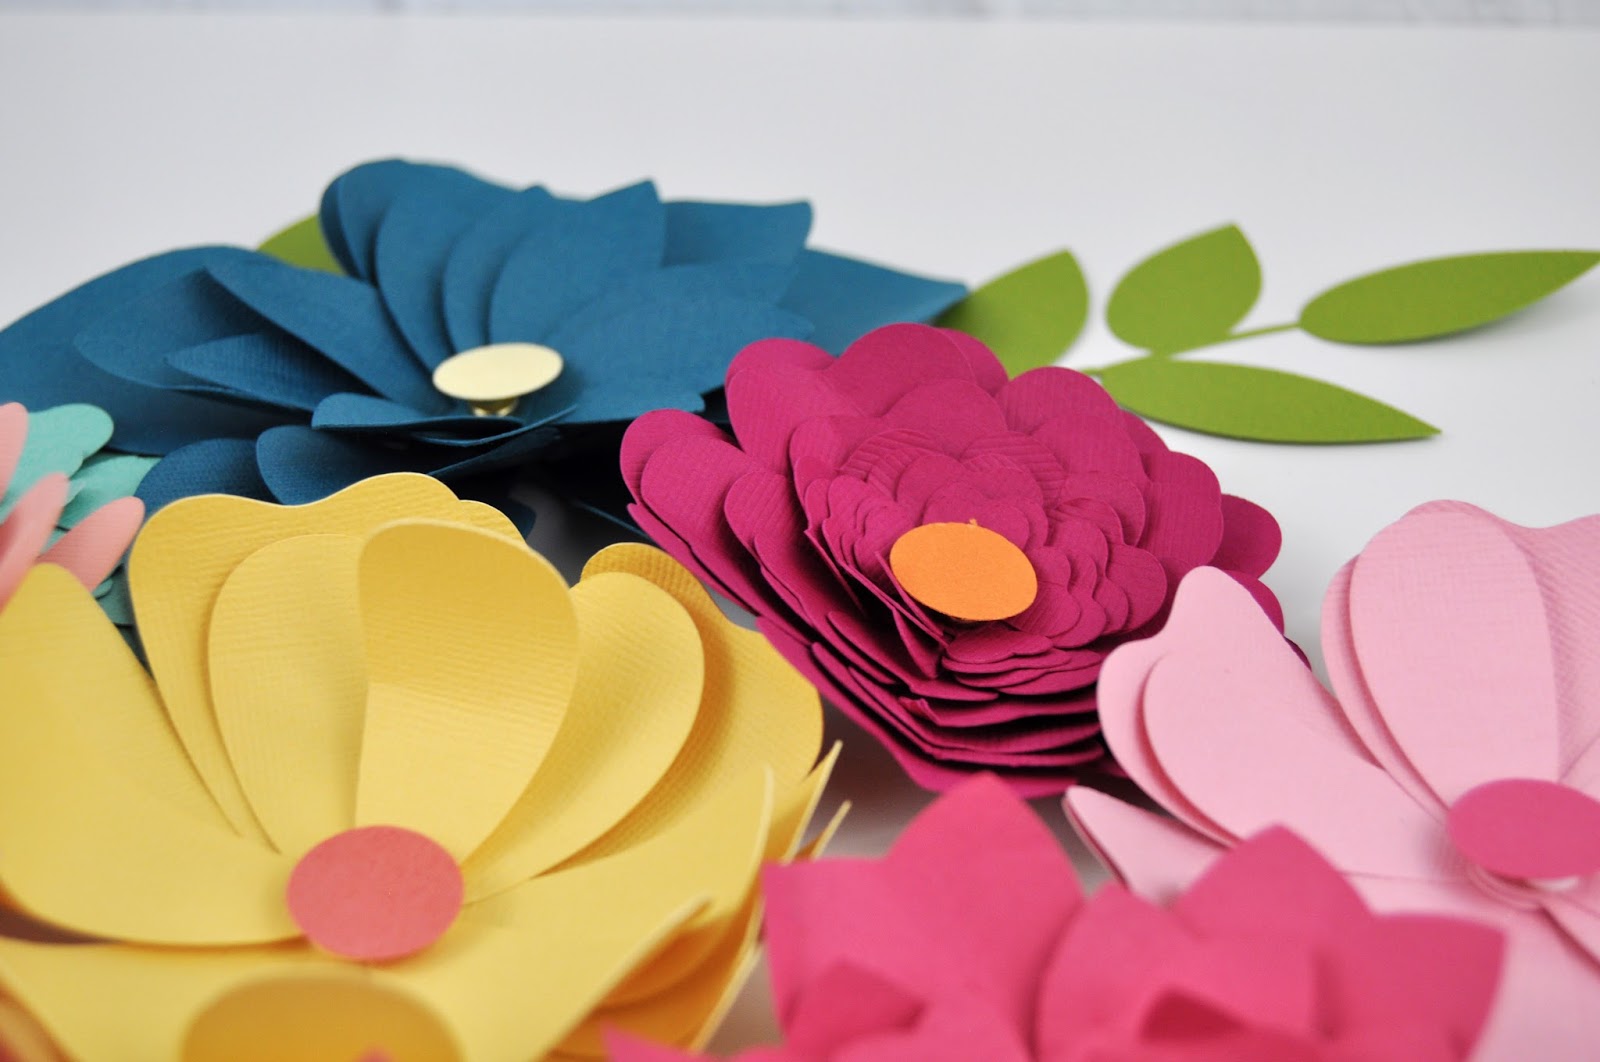 Favorite paper flower cut files. Using Silhouette die cut files to create 3D paper flowers. A list of amazing paper flower cut files. #silhouette #paperflowers #jengallacher